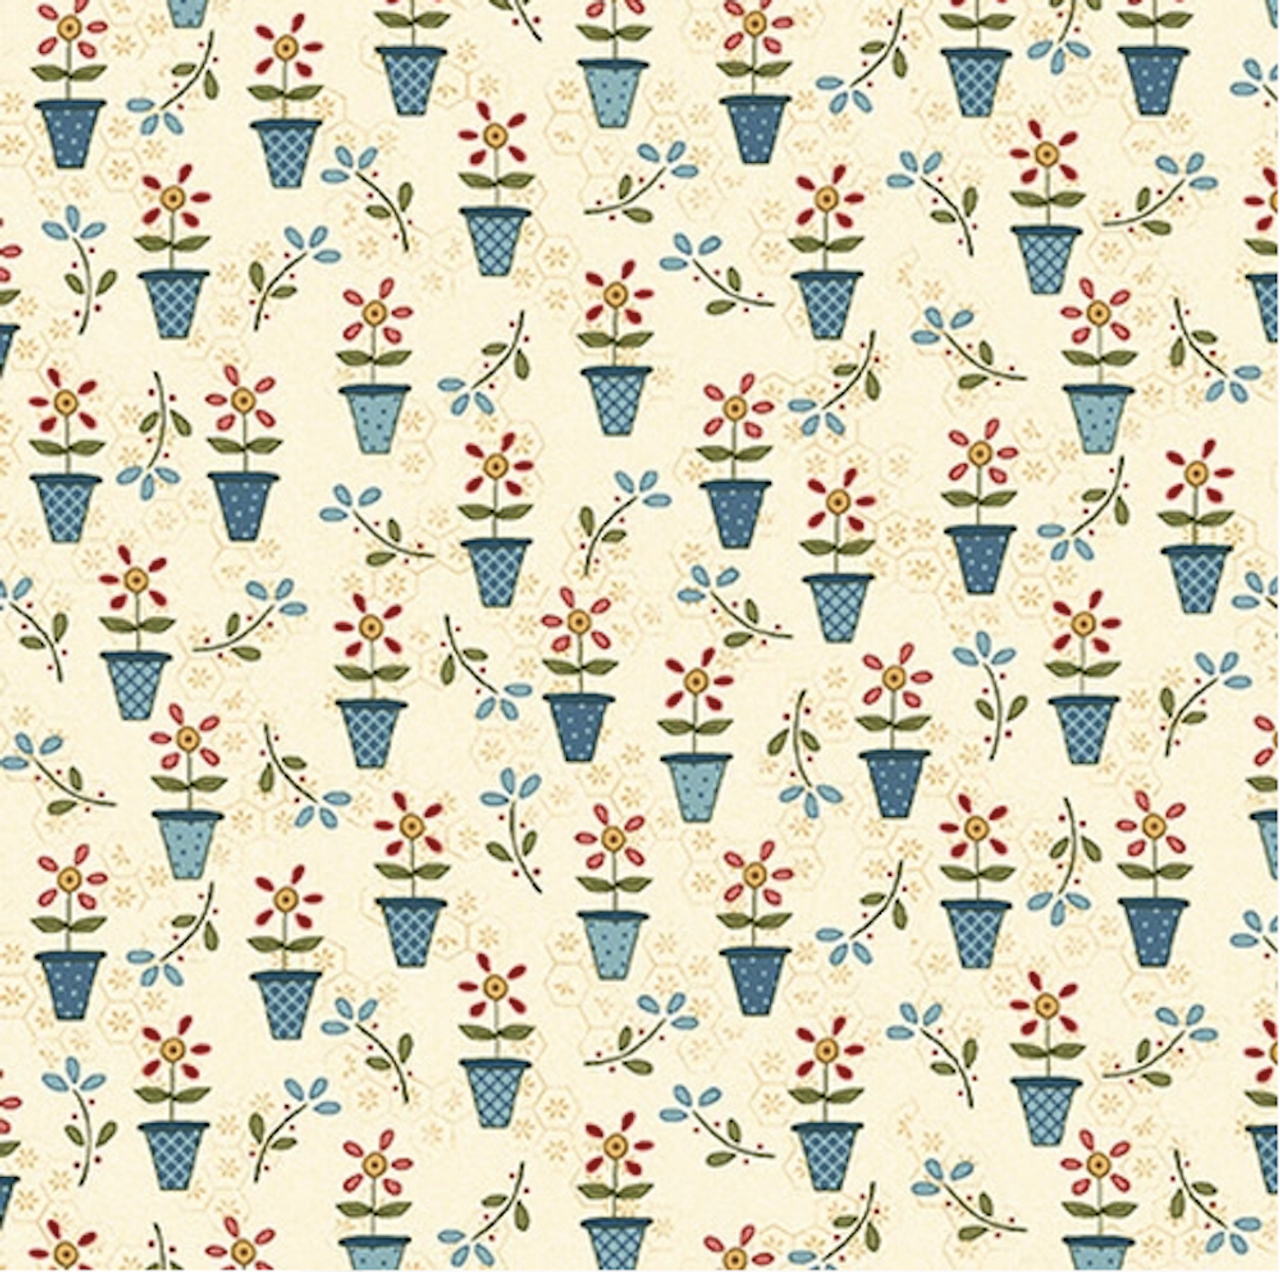 Henry Glass Backyard Happenings Flower Pots Cream Cotton Fabric By The Yard